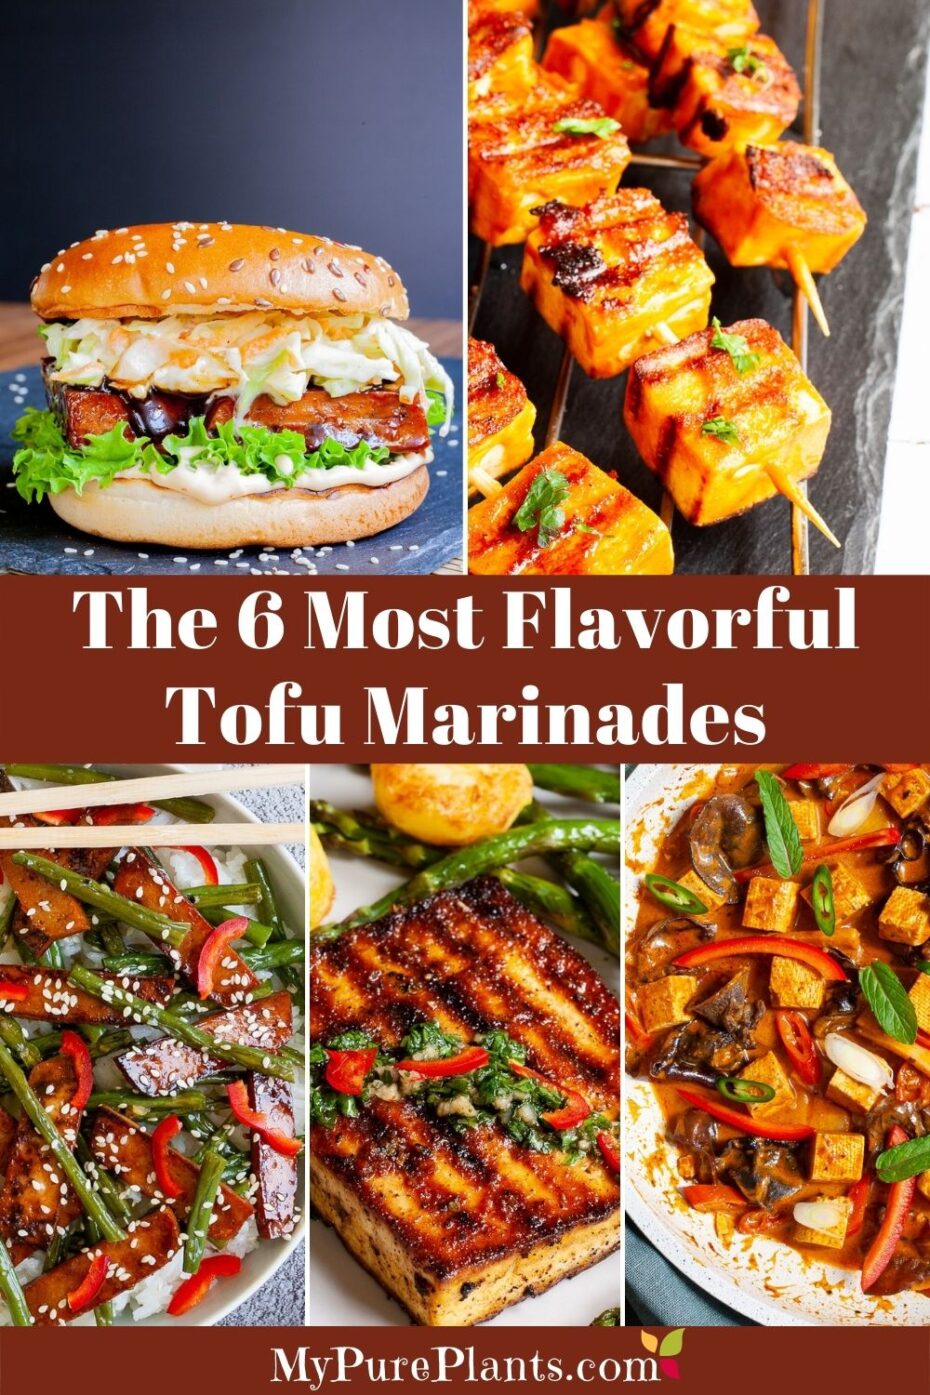 5 photo collage of colorful dishes with a text overlay saying The 6 Most Flavorful Tofu Marinades